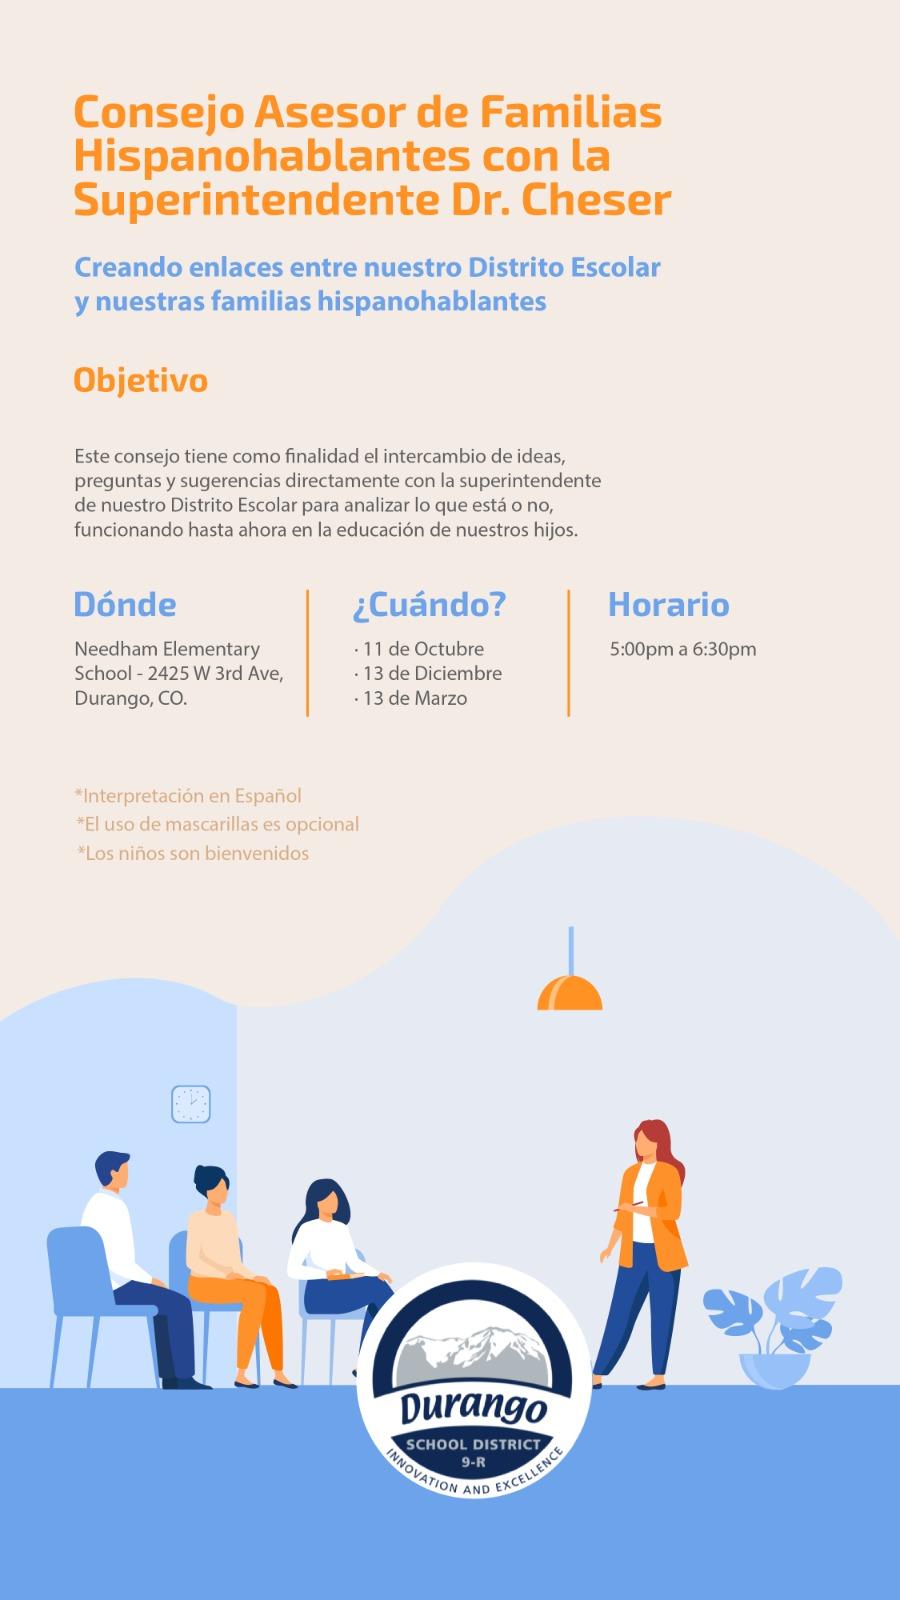 Spanish-speaking council promotional graphic